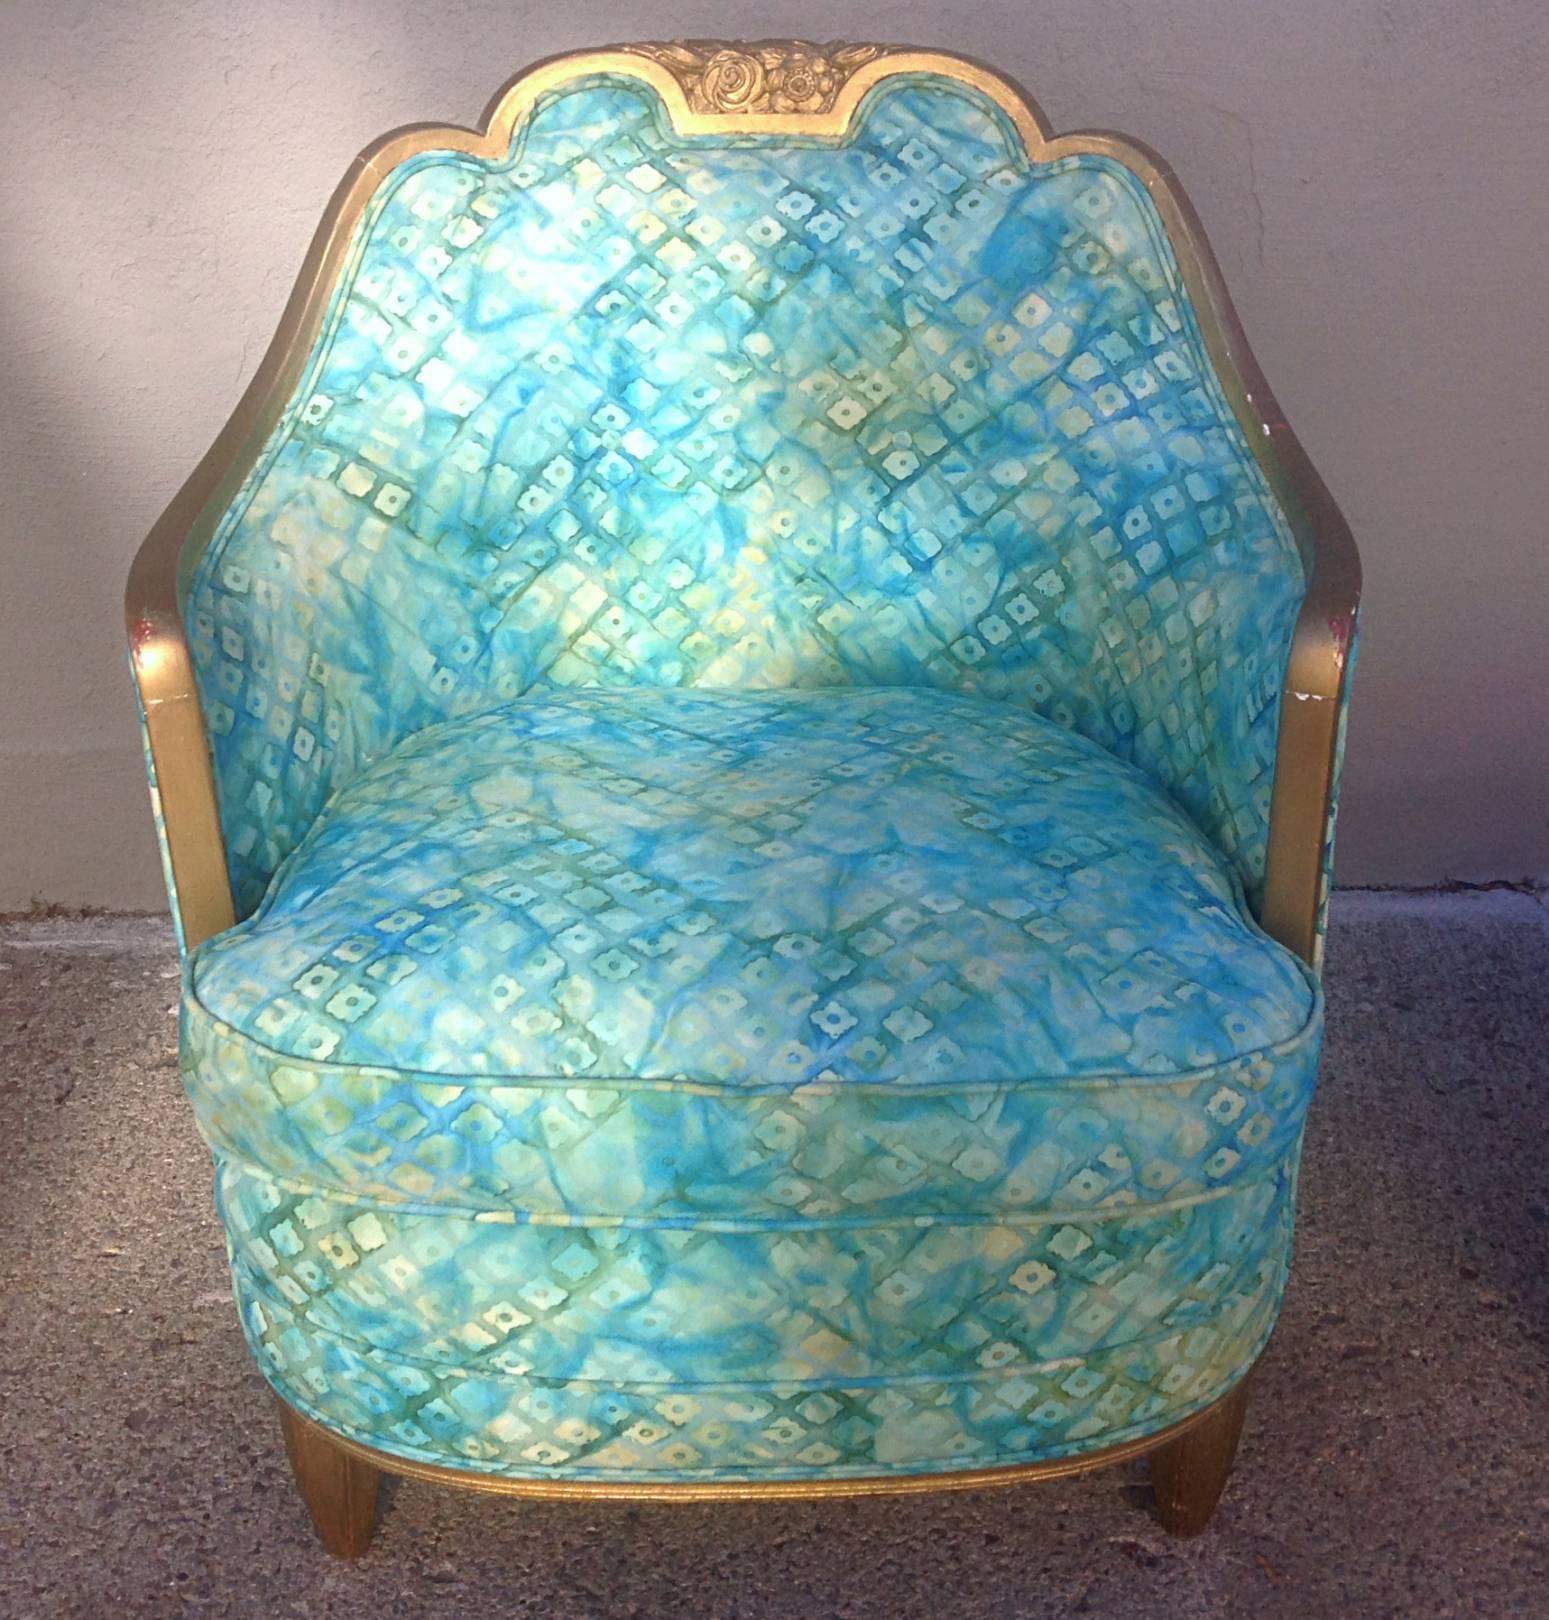 Art Deco lounge chair in the style of Paul Follot. Carved details in crest and feet of chair. Reeded details on Pouf feet. Down filled loose cushions on both the chair and ottoman. Age and wear present on gilt finish. Newly refurbished innards and